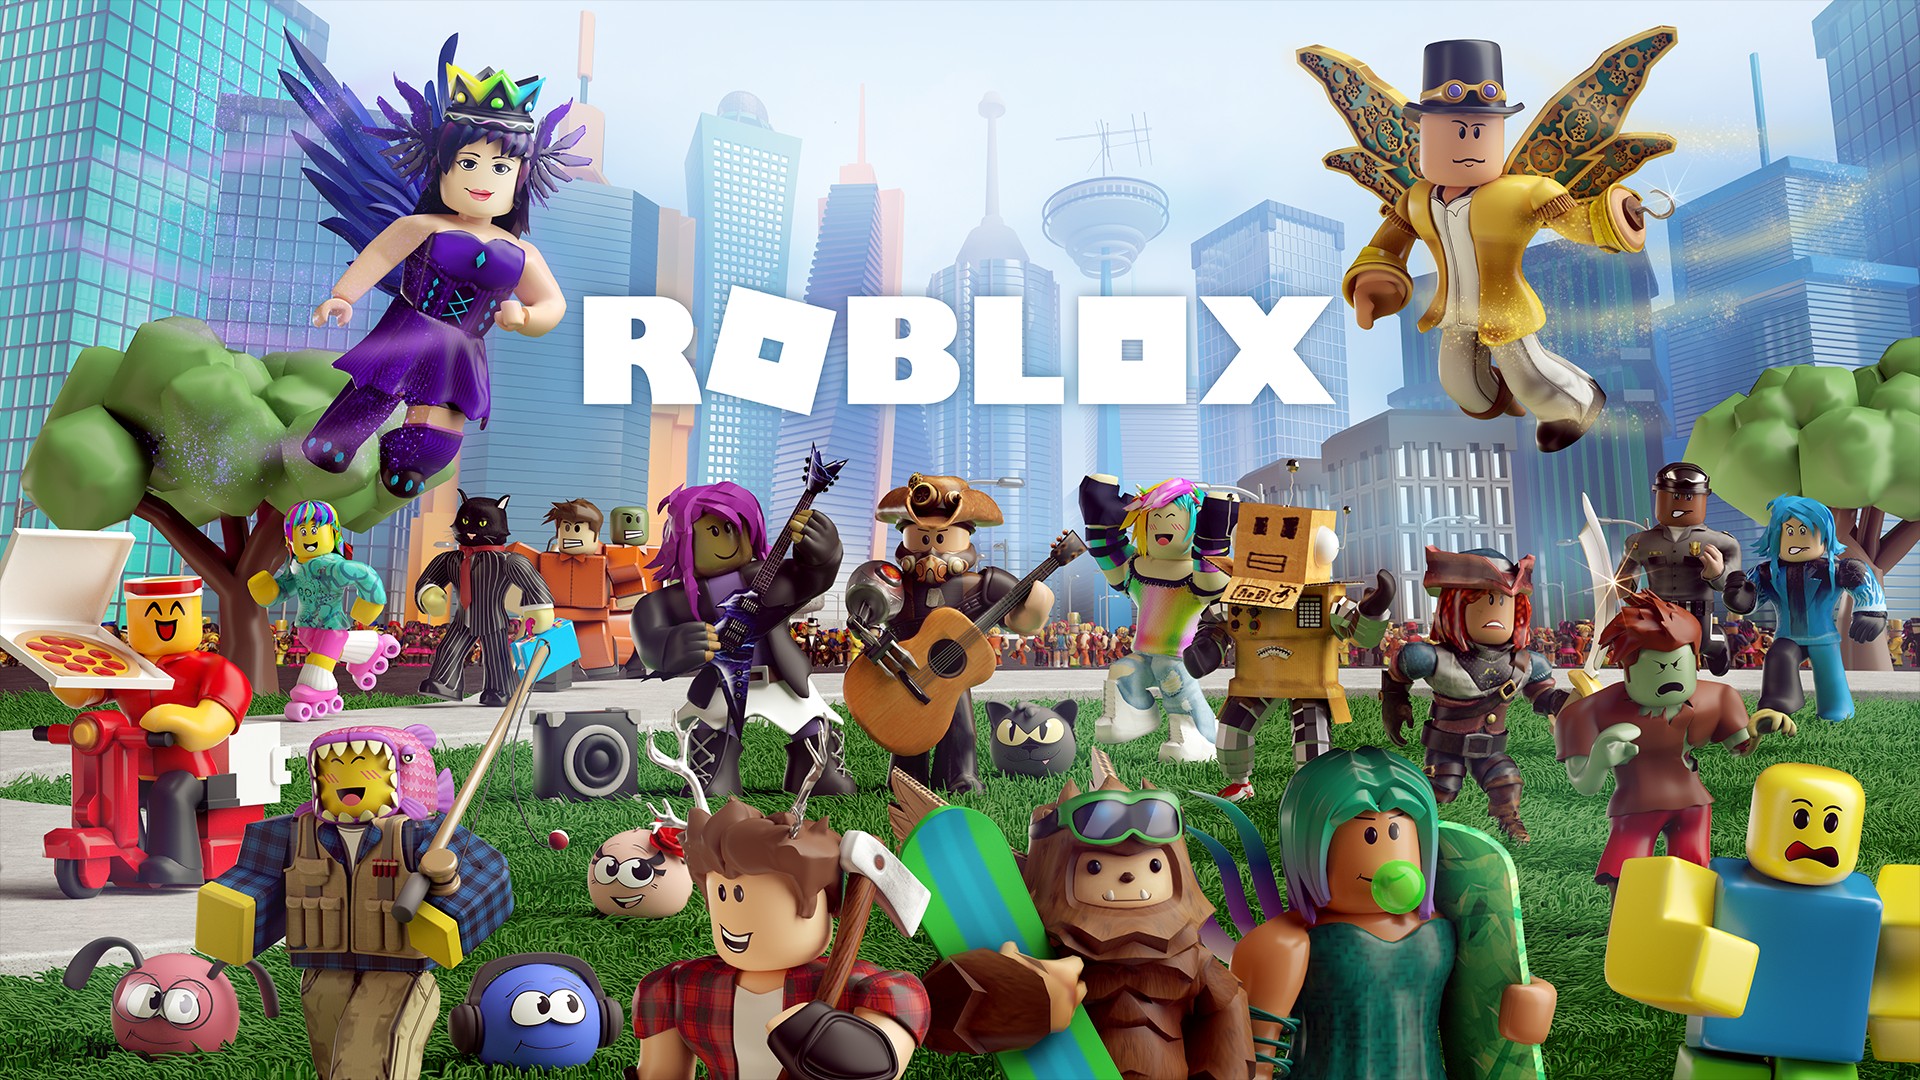 Roblox PC Wallpapers - Top Free Roblox PC Backgrounds